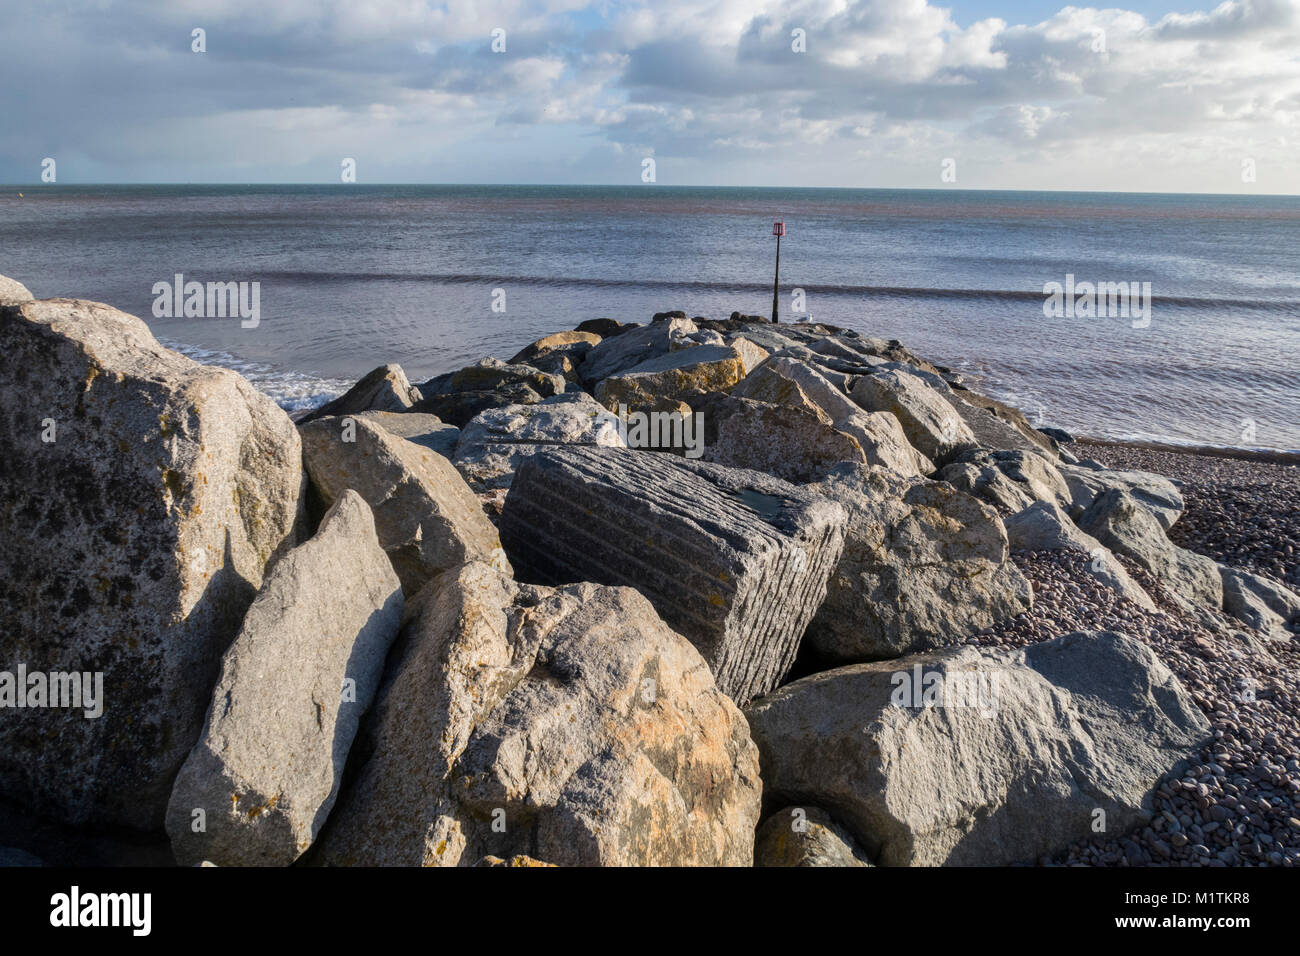 Rock sea defences on the beach at Sidmouth, Devon, England, UK. Stock Photo